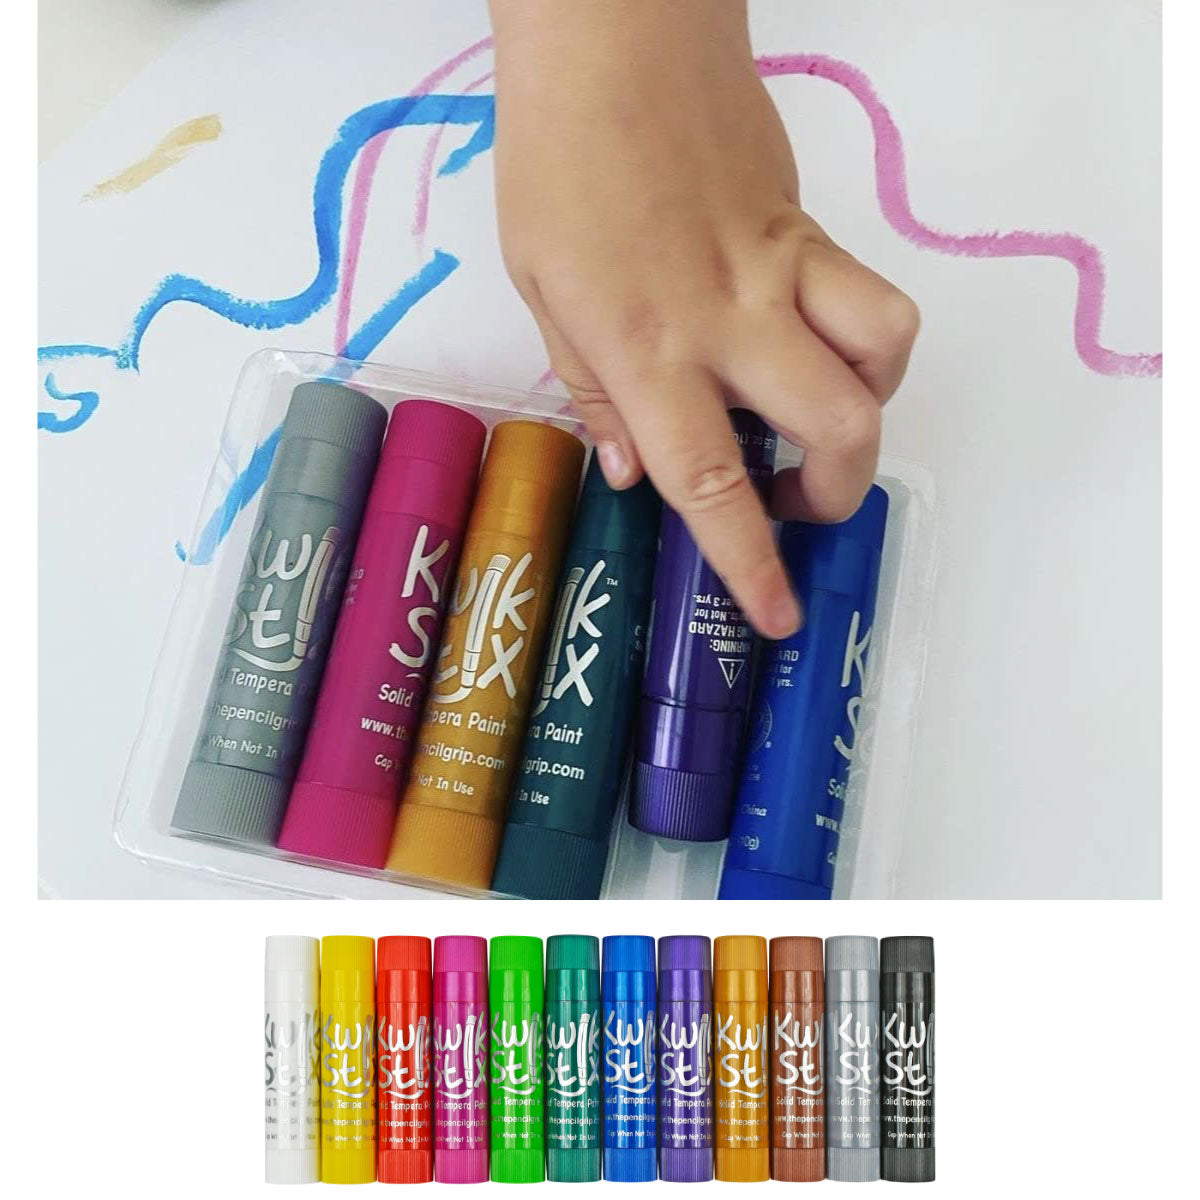 Kwik Stix Metallix Solid Tempera Paints from The Pencil Grip Co